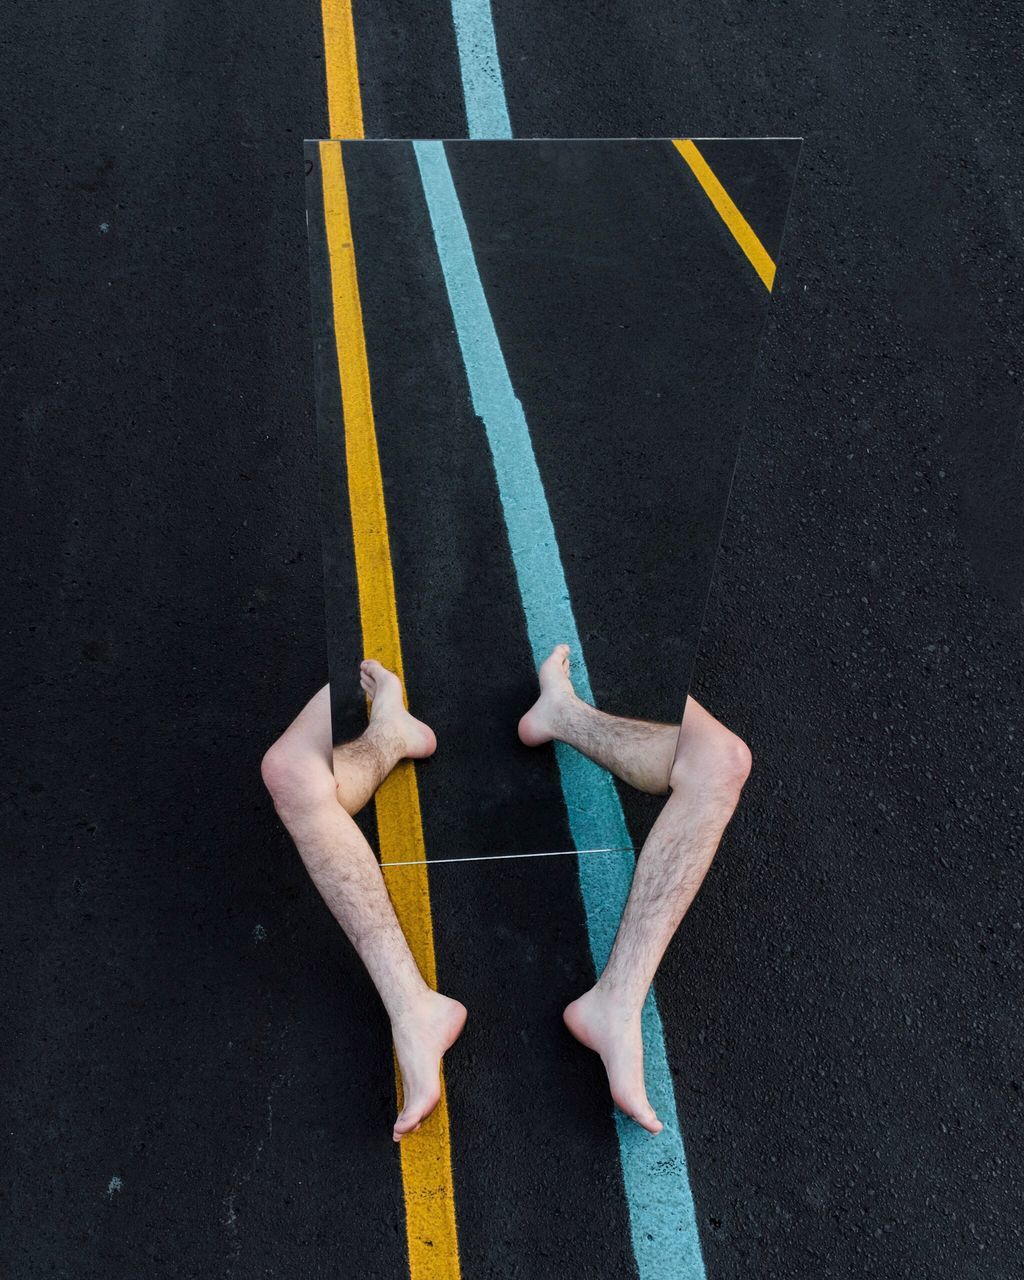 road marking, high angle view, two people, yellow, real people, road, day, men, low section, outdoors, human body part, human hand, people